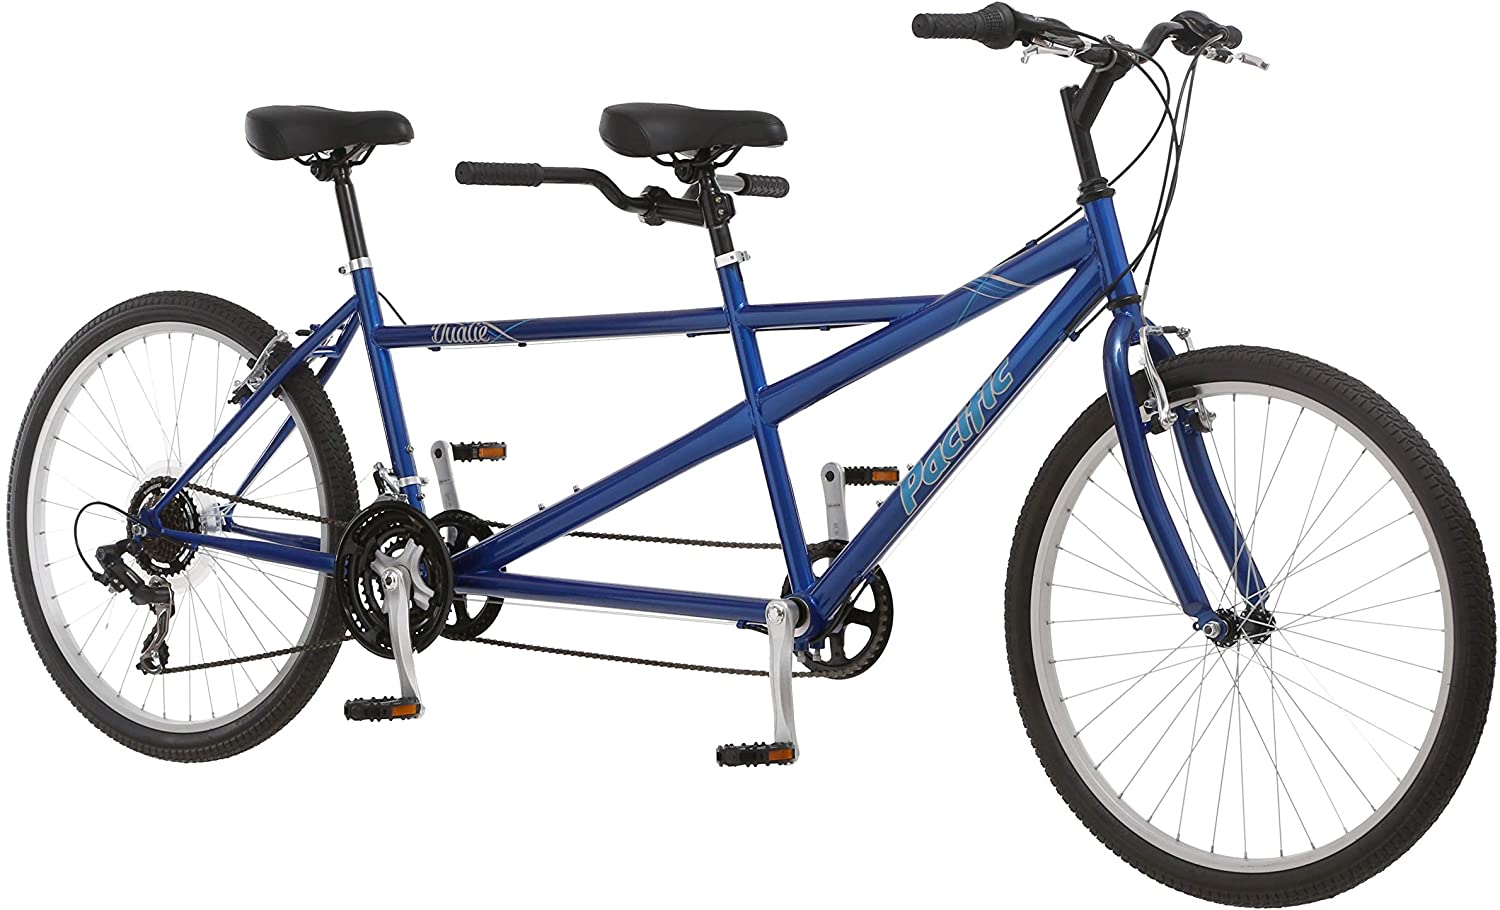 The Pacific Dualie Adult Tandem Bike